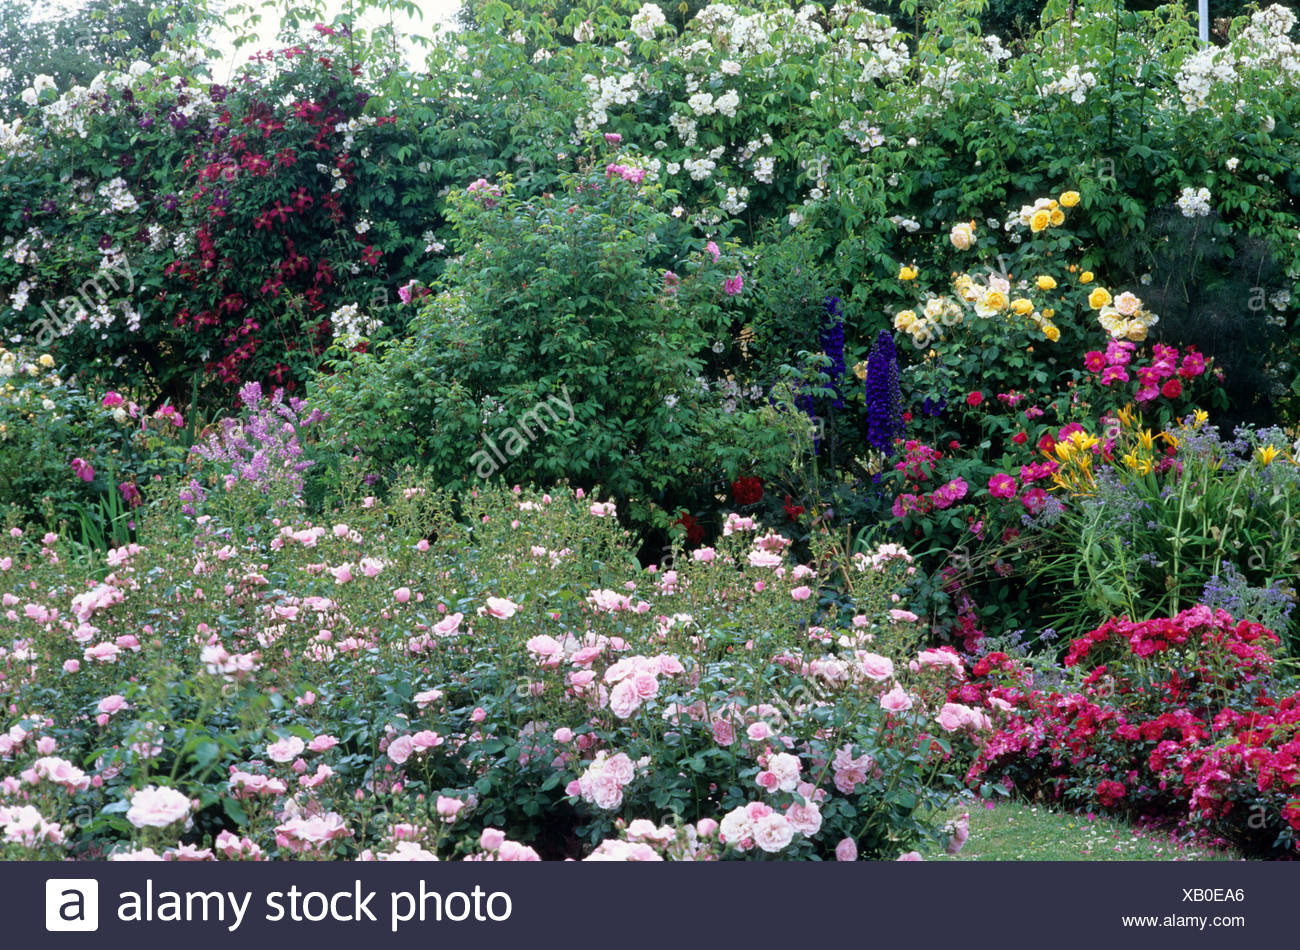 Rose Garden Gardens Rosa Bonica And Herbaceous Planting Roses